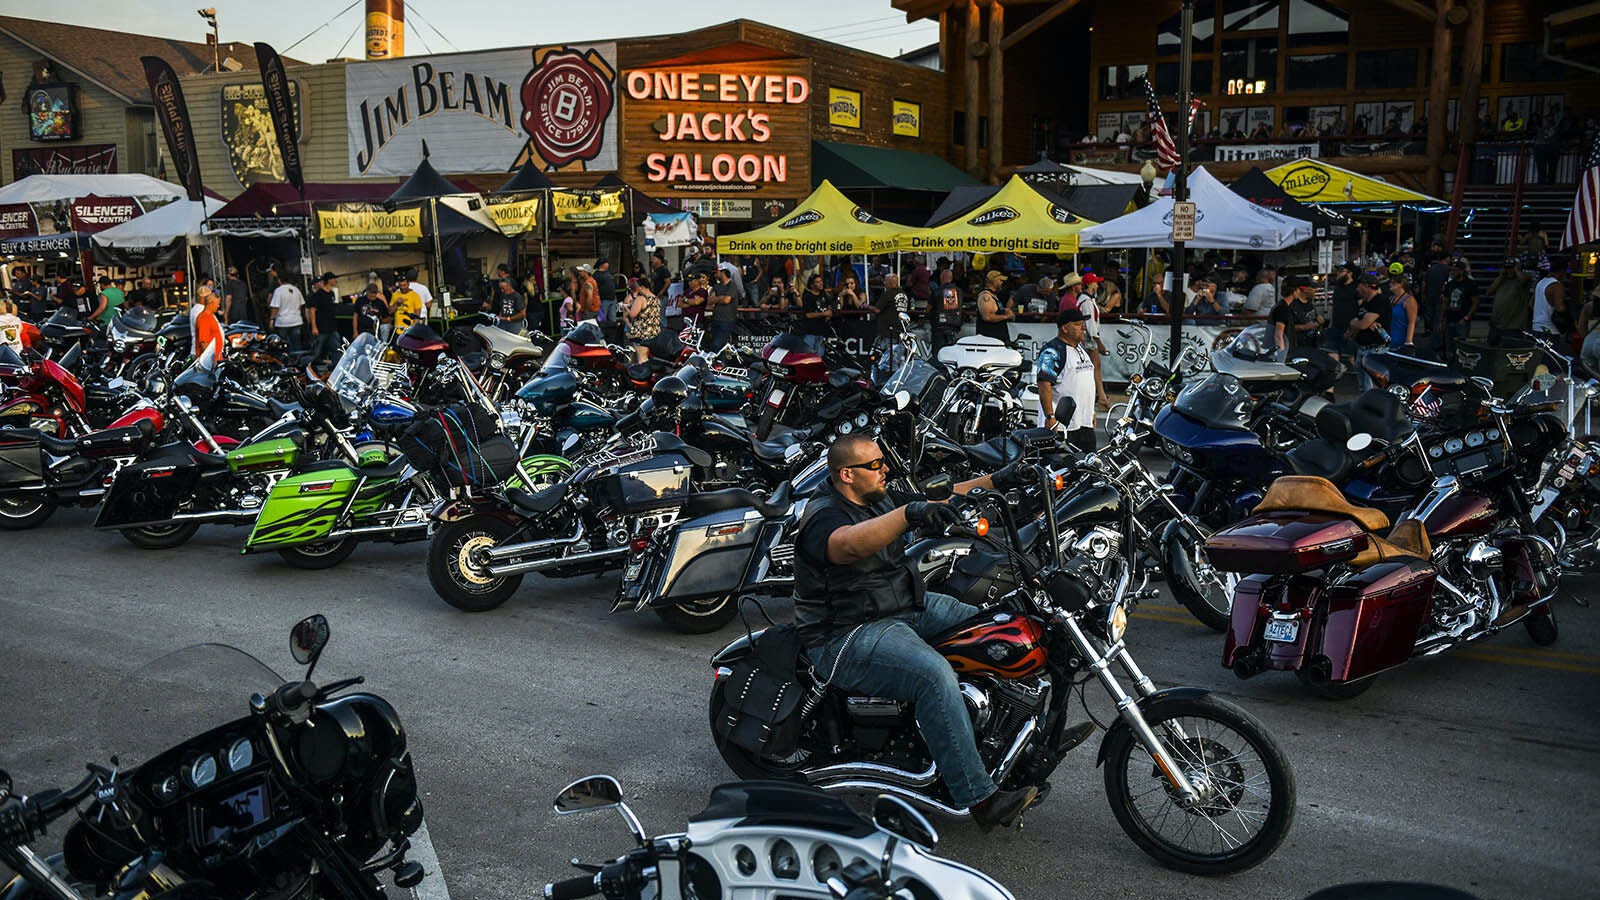 The bar scene during the Sturgis Motorcycle Rally is legendary.